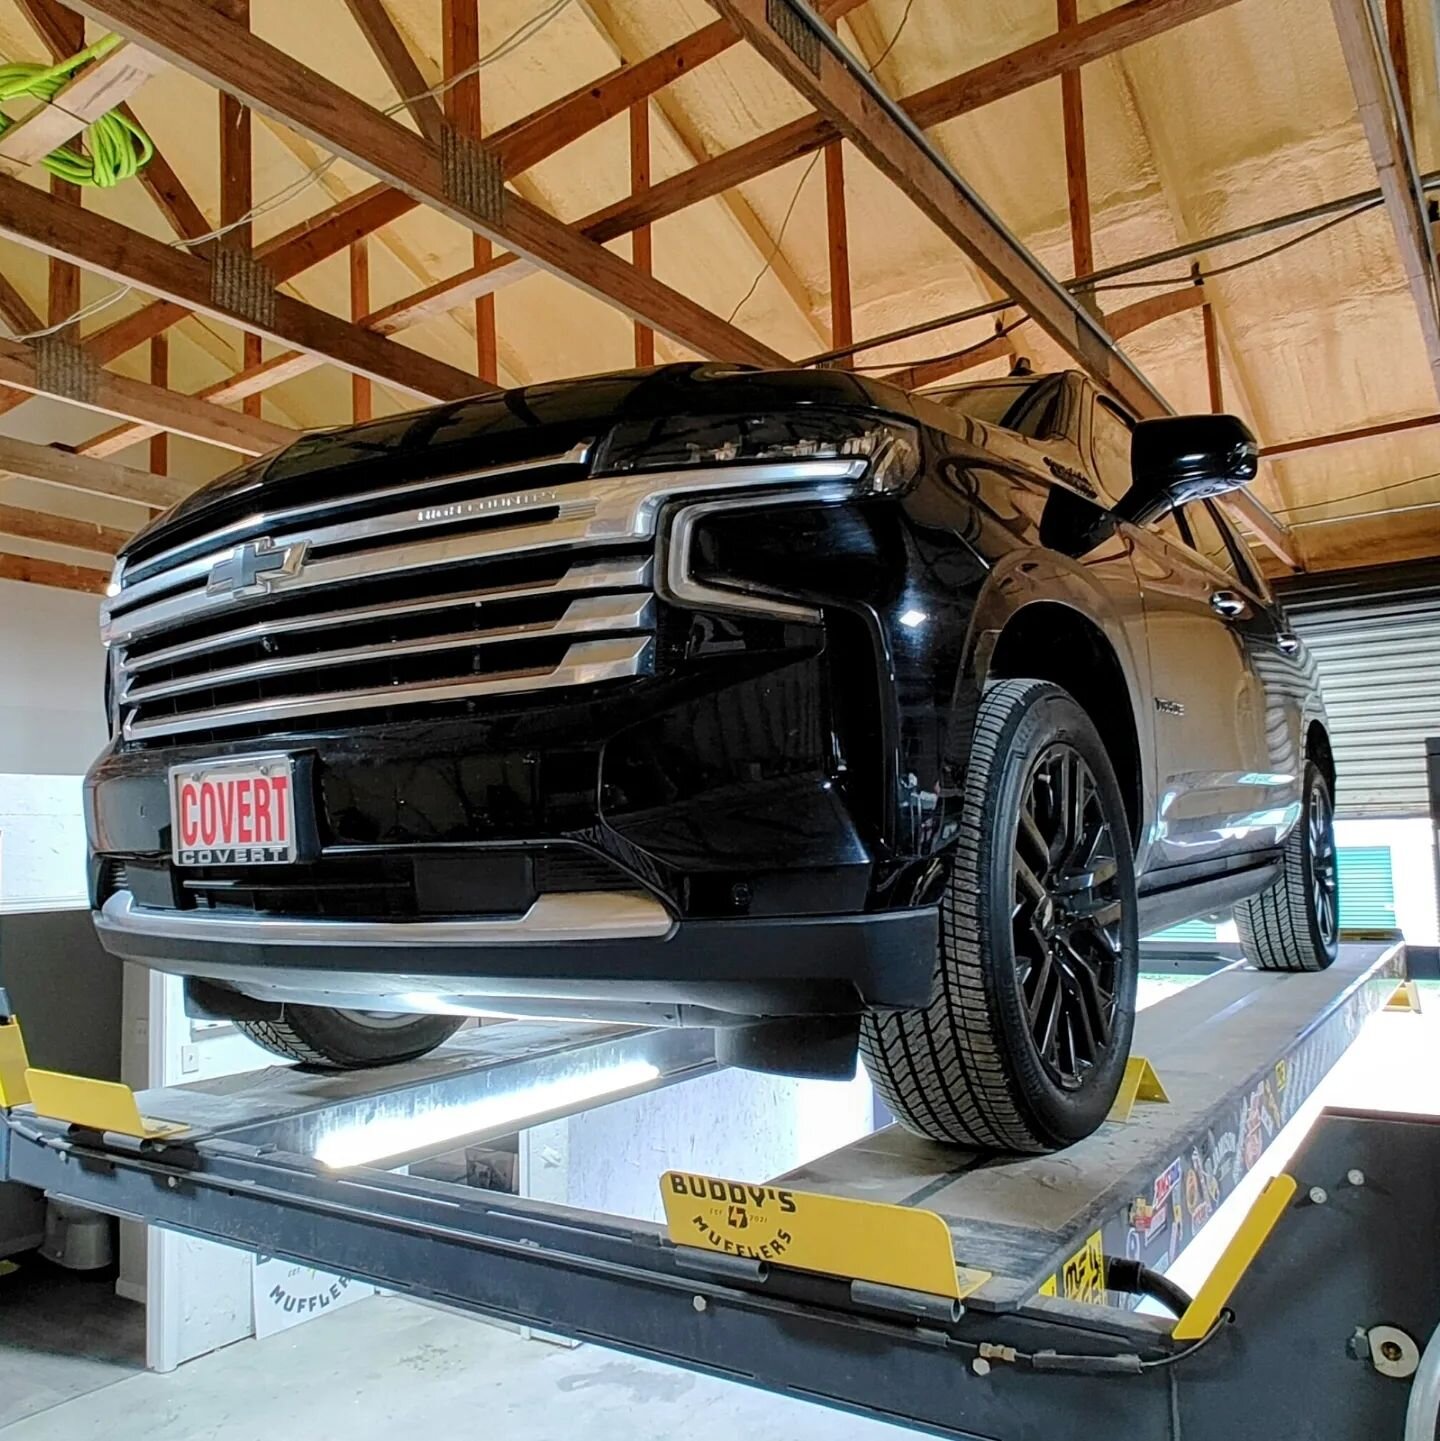 On the lift today we had a #chevrolet #chevy #tahoe #highcountry in for that #blackwidowexhaust magic. We yanked out the stock muffler and welded up a #widowmaker #neighborhater to let that rumble out. Sounds like a proper truck now.
Who's next?
#bud